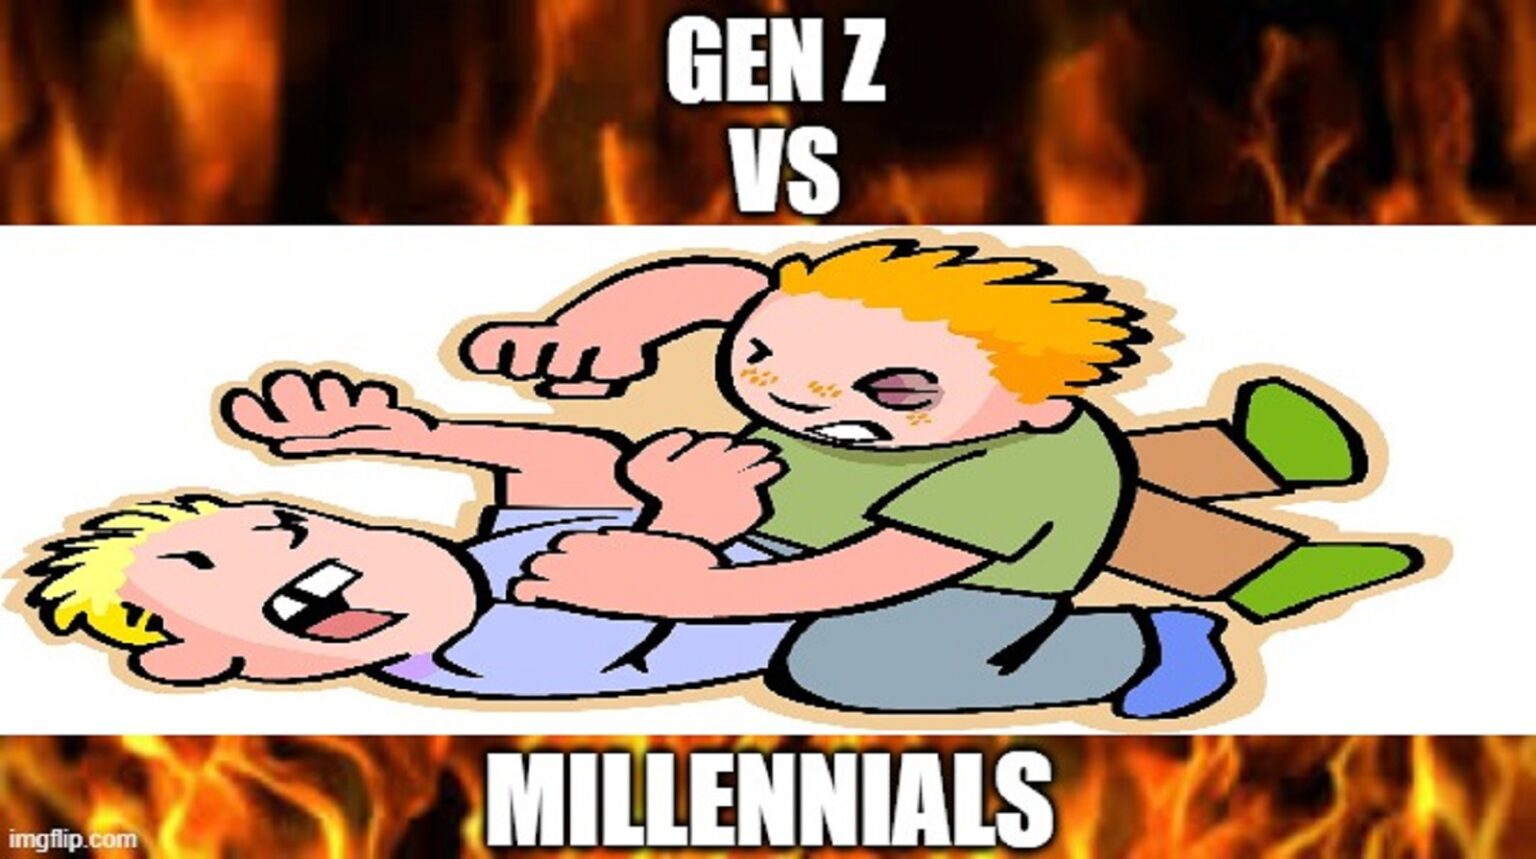 Whose team are you on: Gen Z or millennials? The fight is on. It's Millennials vs. Gen Z time and here are the best memes from the fight.